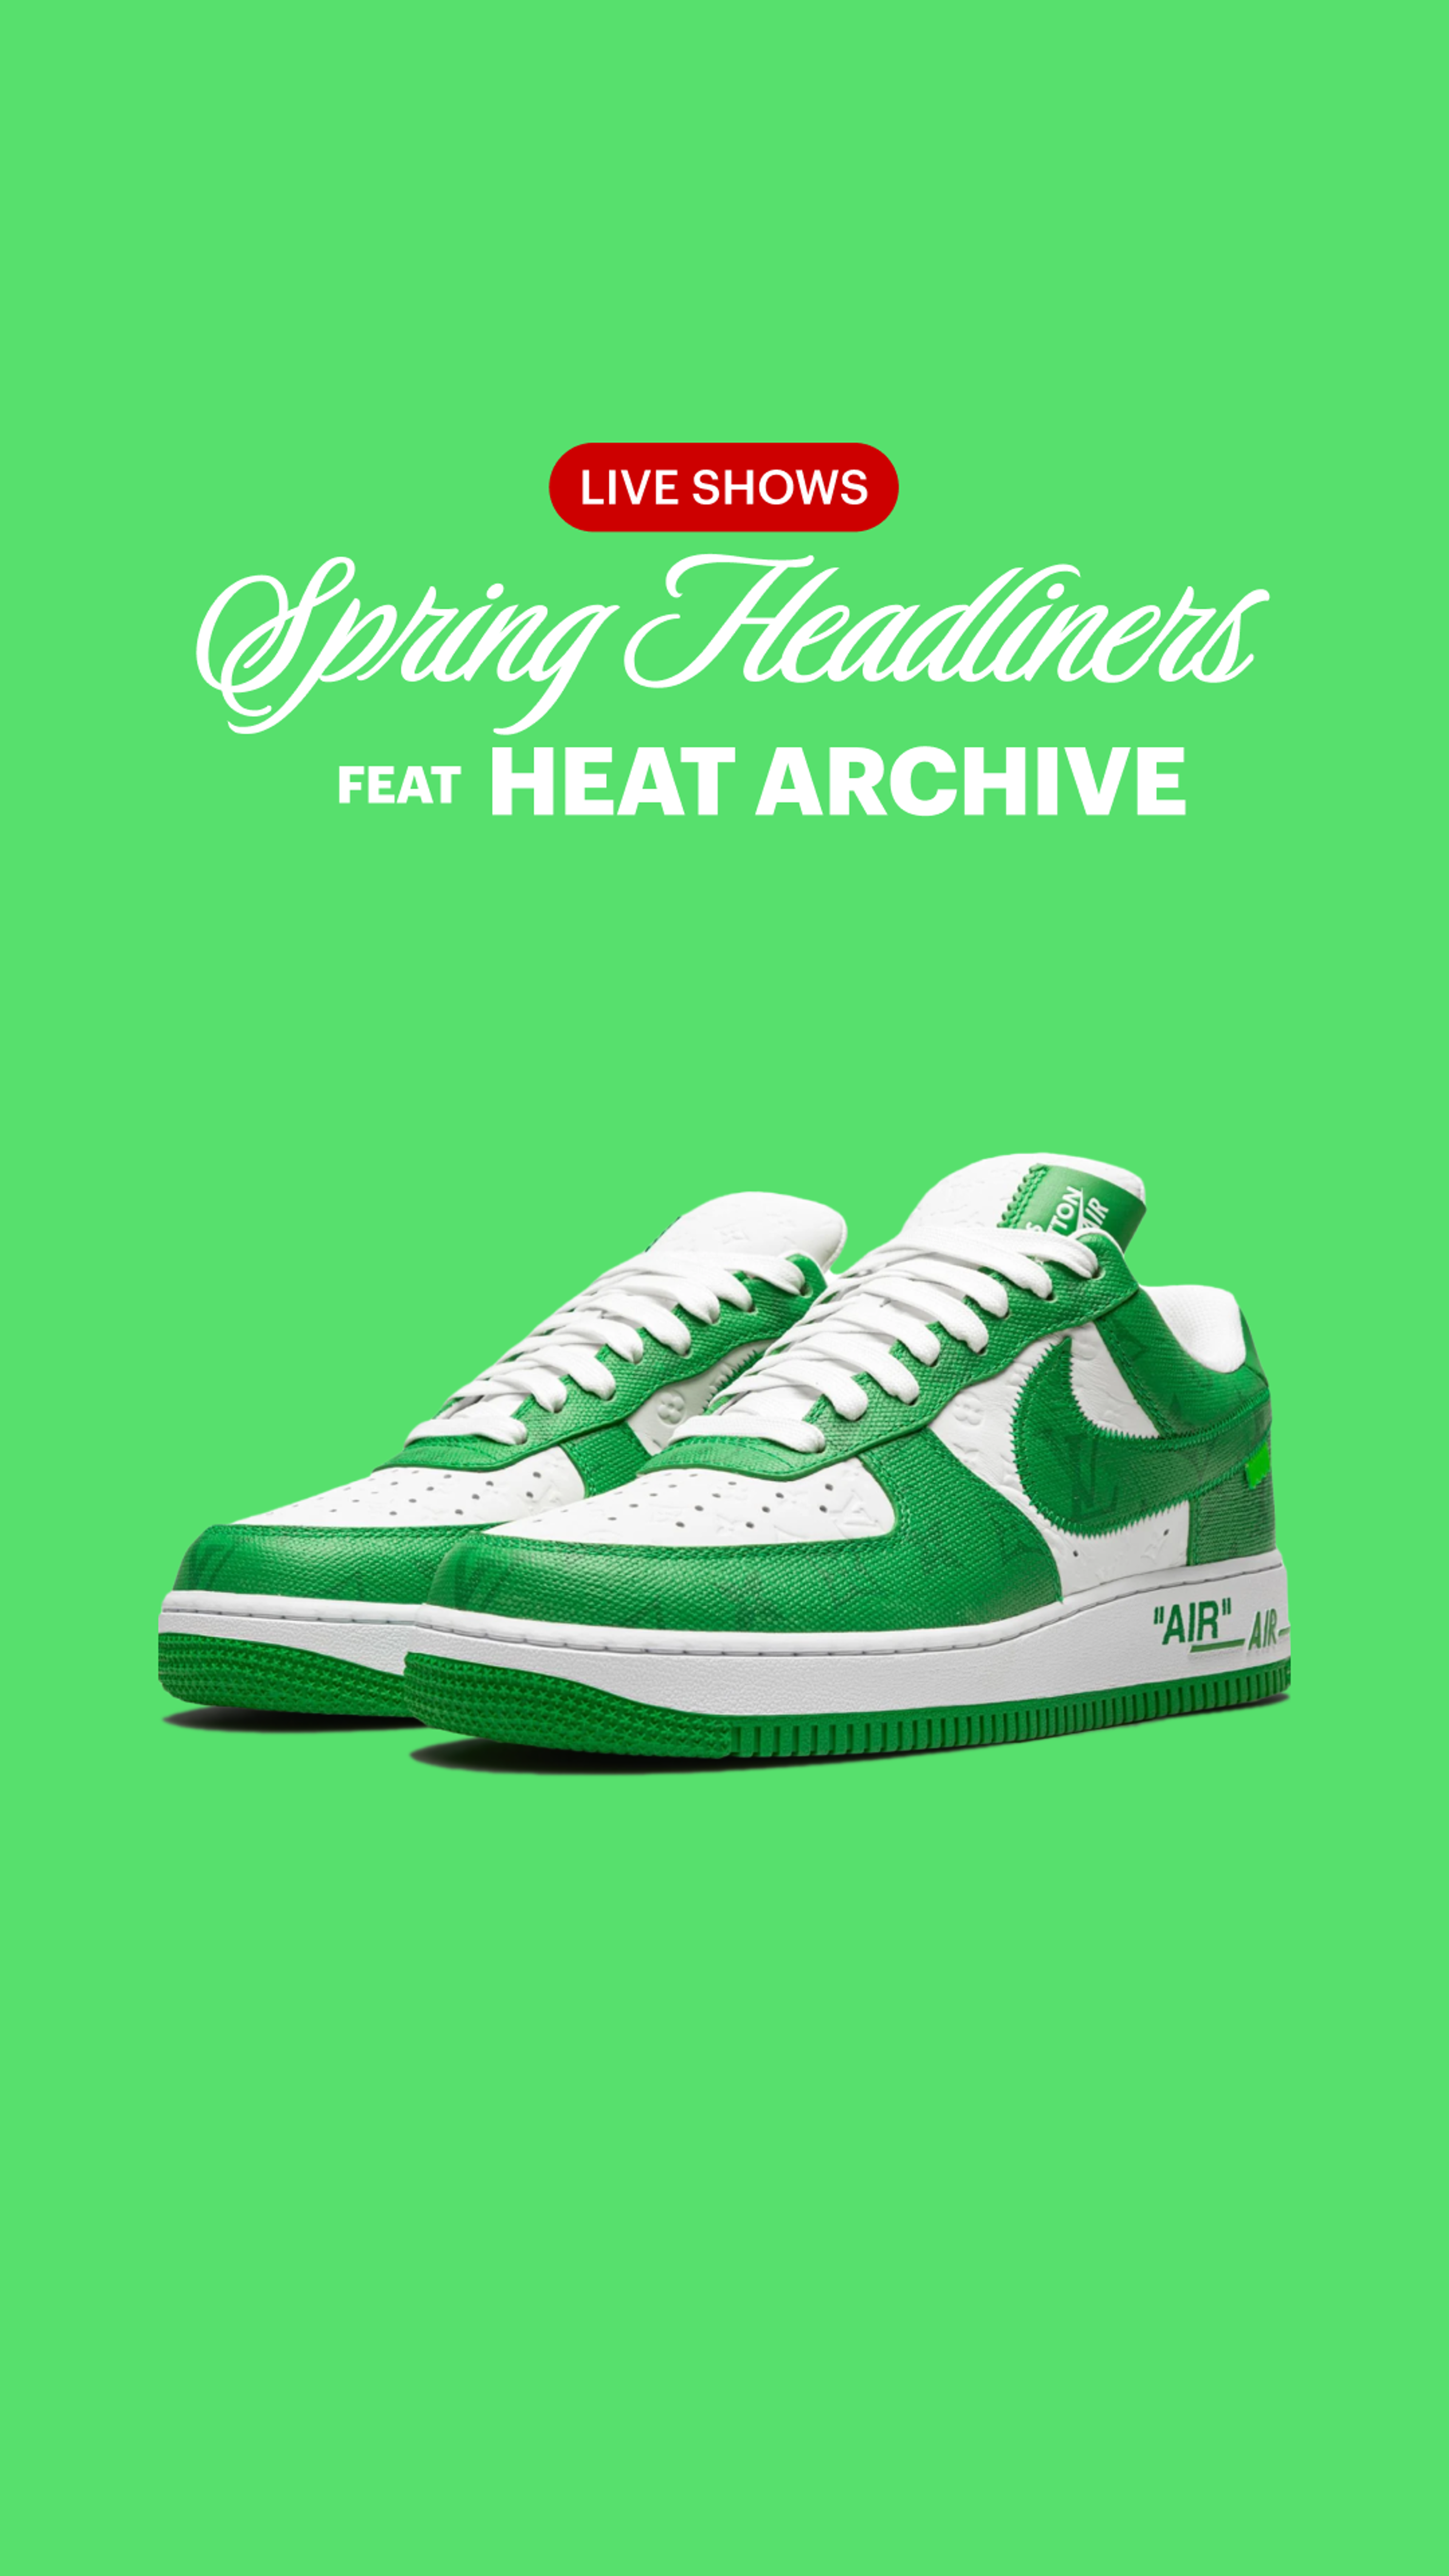 Preview image for the show titled "Spring Shopping Guide with Heat Archive" at Today @ 9:30 PM